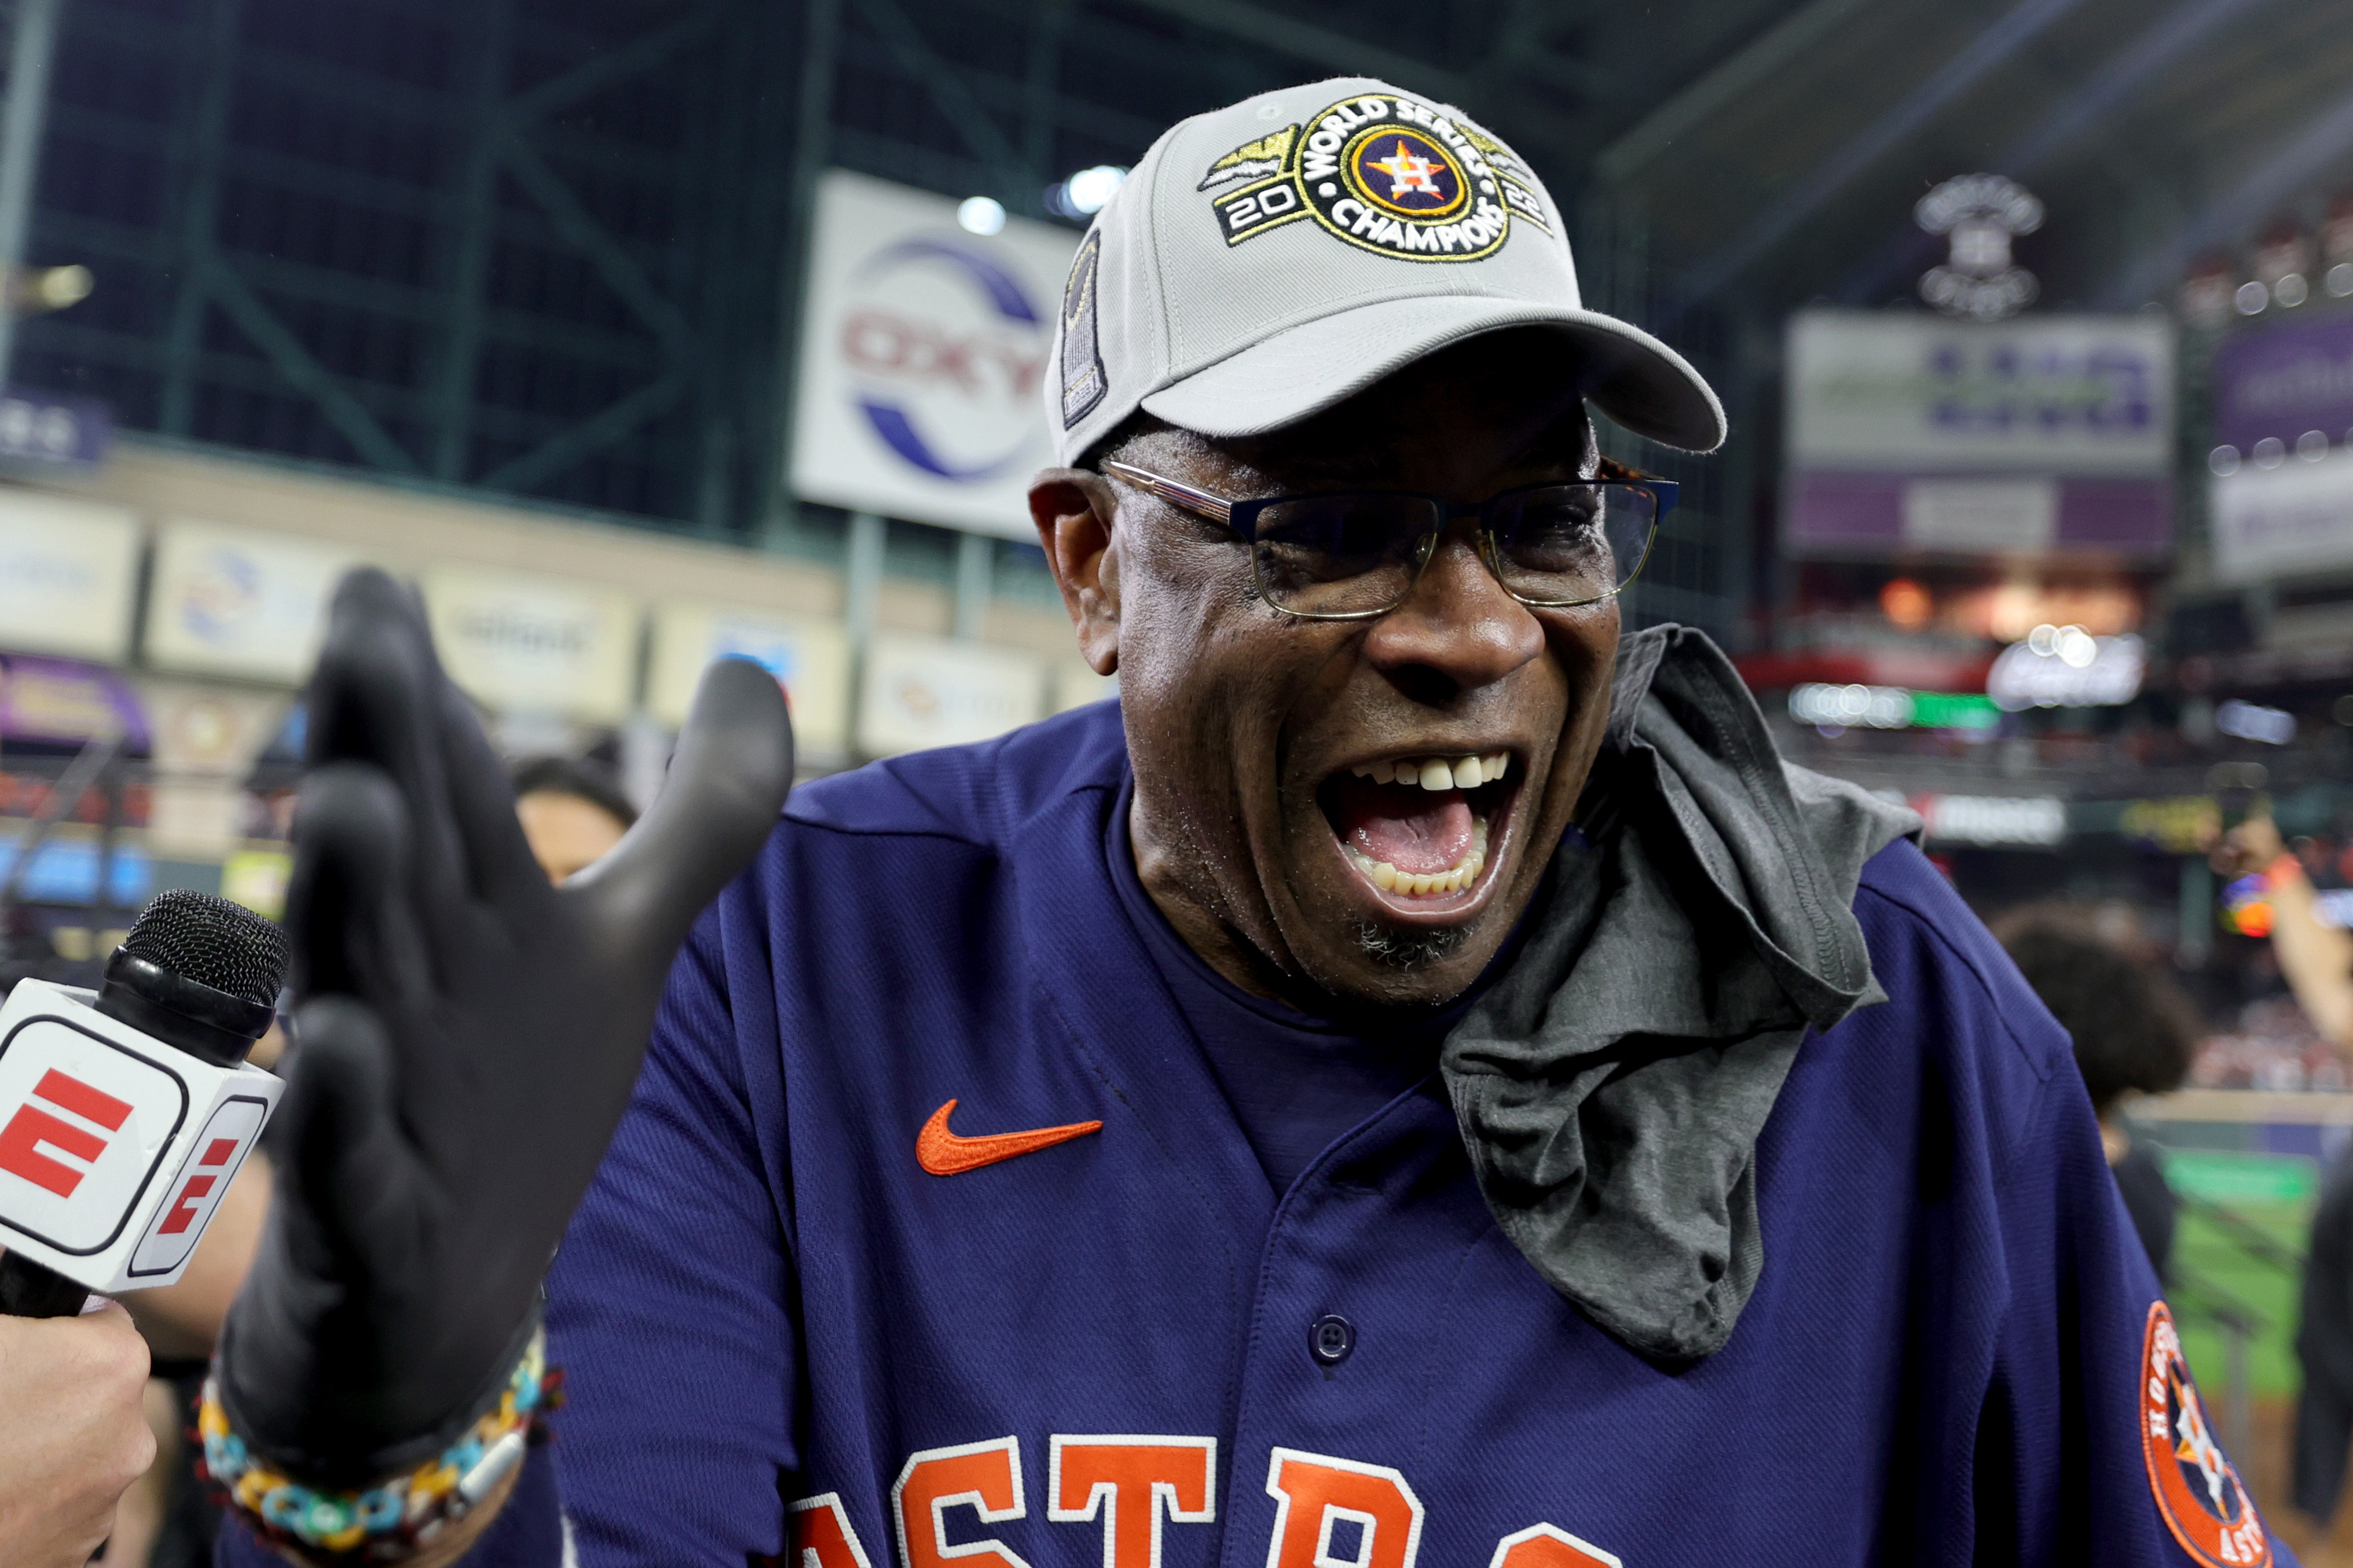 Dusty Baker, manager of the houston Astros, celebrates after his team beats the Philadelphia Phillies 4-1 in Game 6 of the MLB World Series to win the series 4-2 at Minute Maid Park in Houston, Texas, November 5, 2022. /CFP